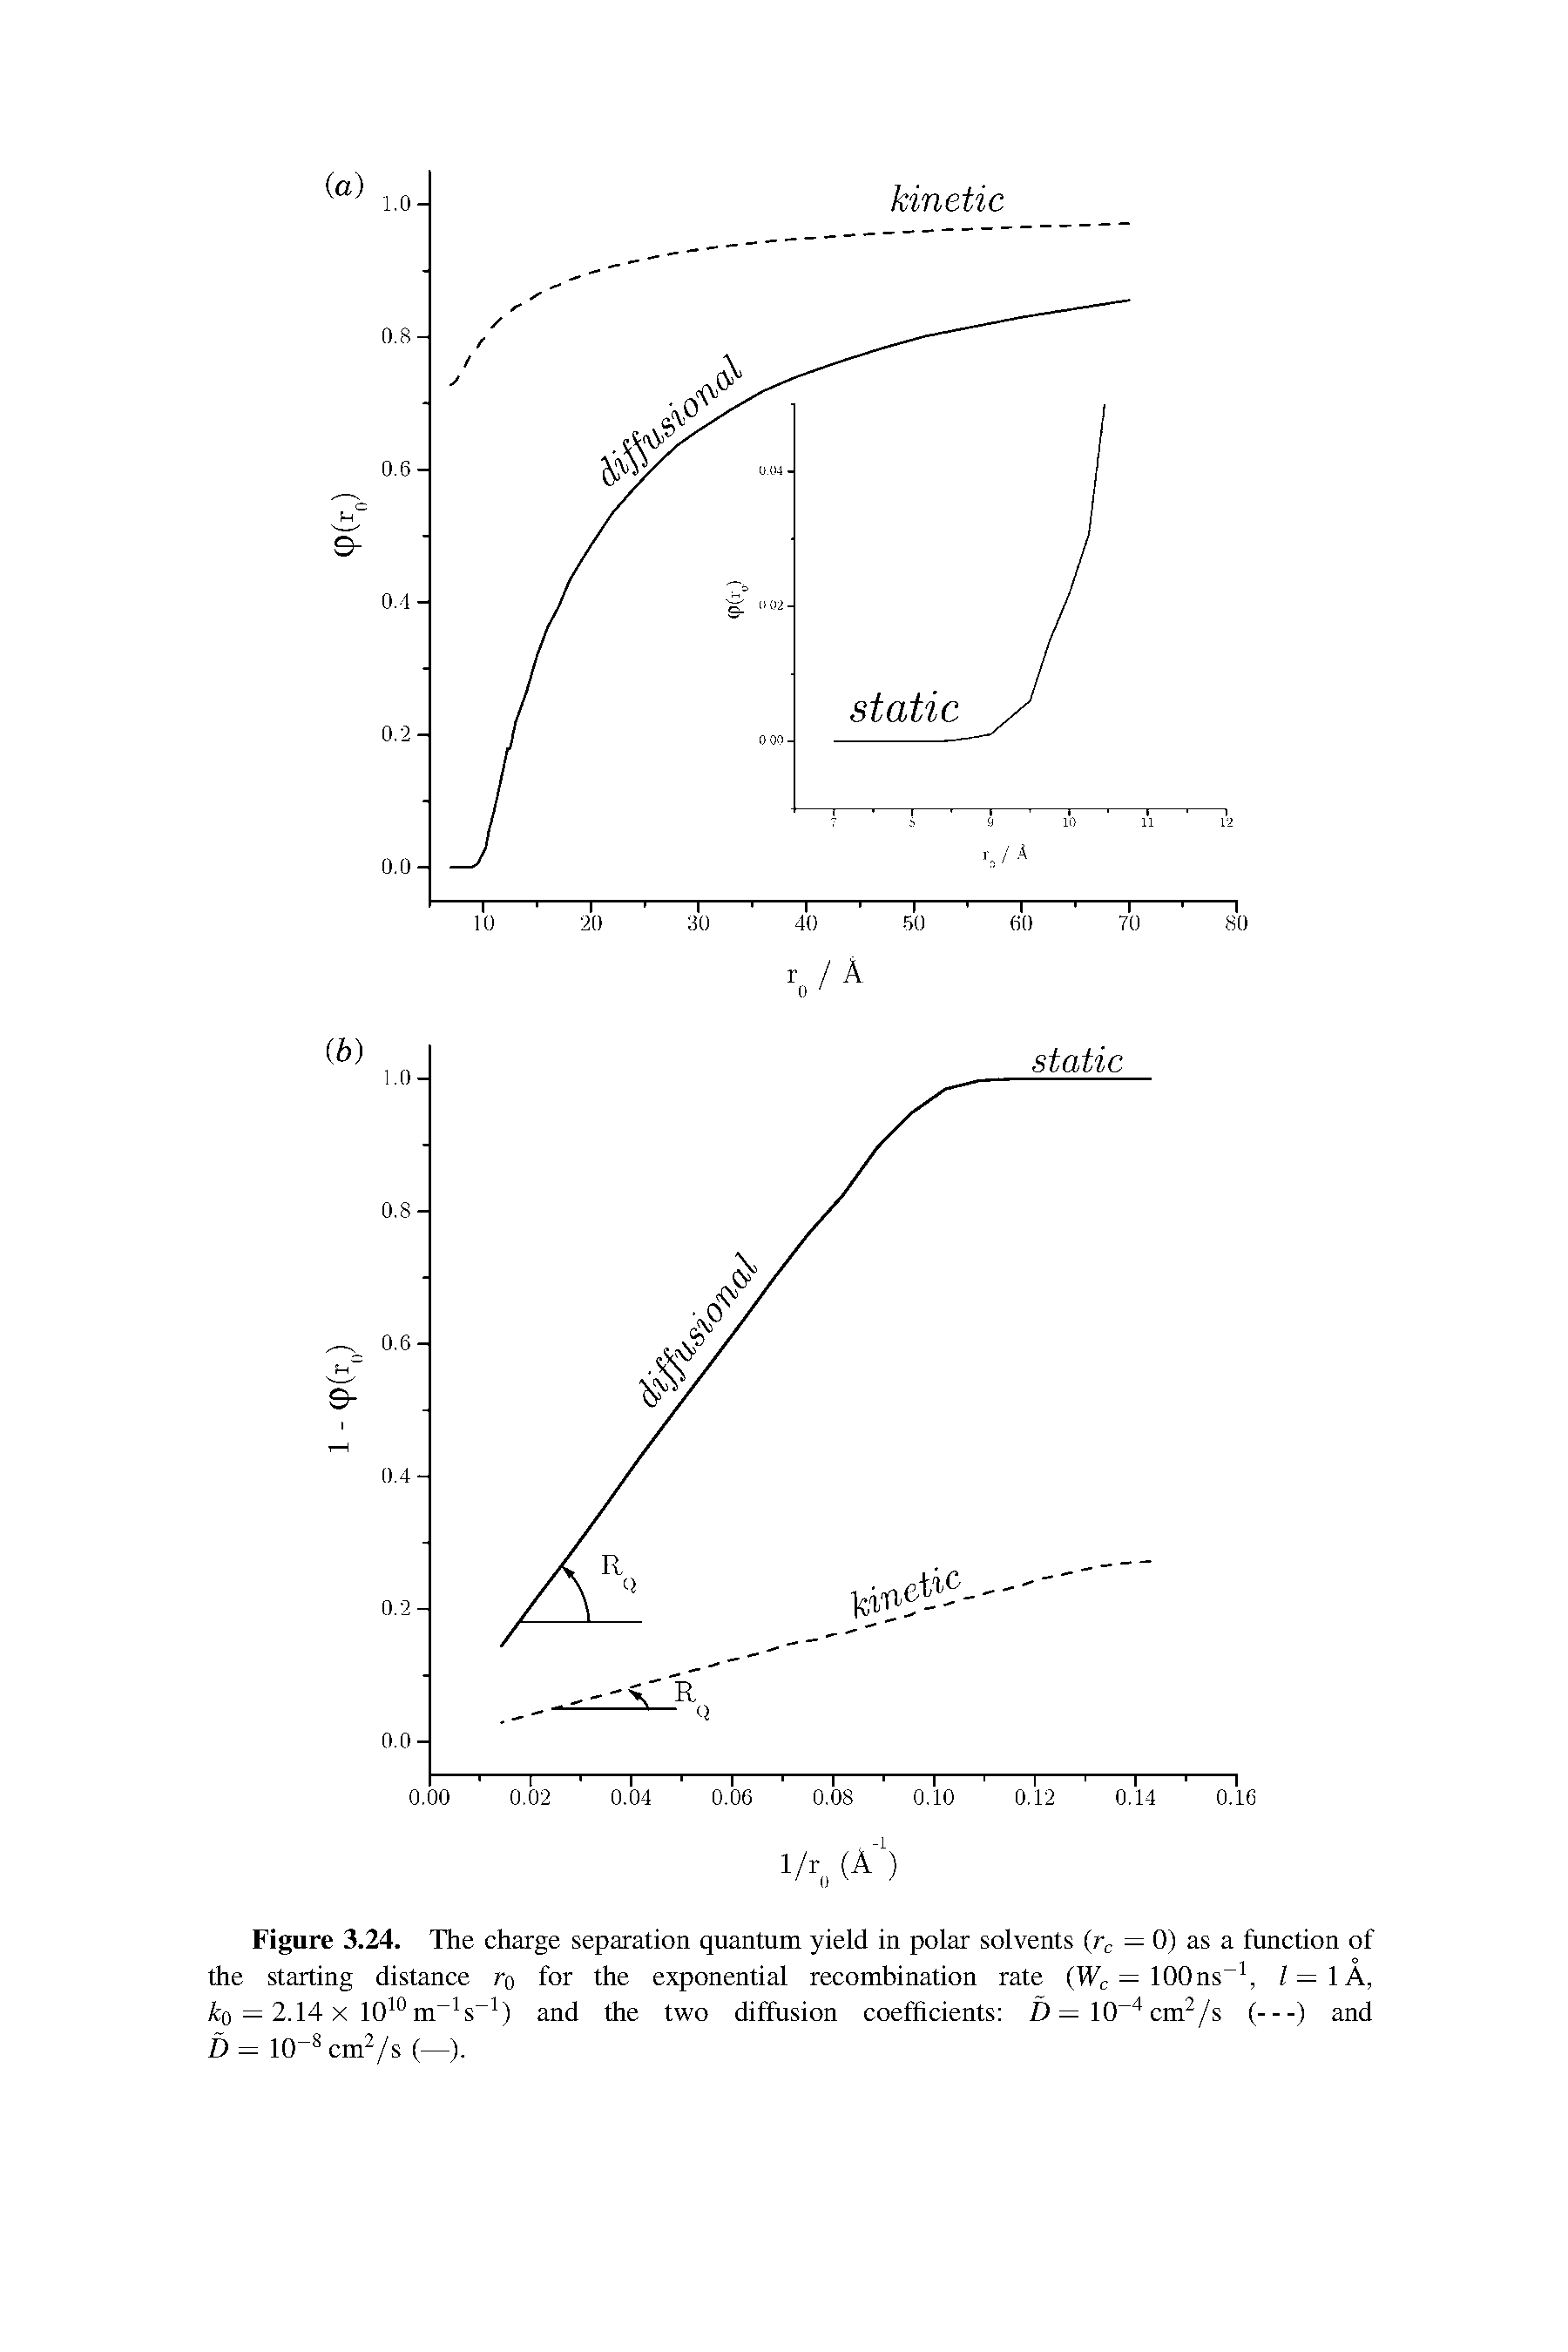 Figure 3.24. The charge separation quantum yield in polar solvents (rc — 0) as a function of the starting distance ro for the exponential recombination rate (Wc — 100ns 1, / — 1 A, o = 2.14x 1010m 1s 1) and the two diffusion coefficients Z)=10-4cm2/s (—) and D = 1(T8 cm2/s (—).